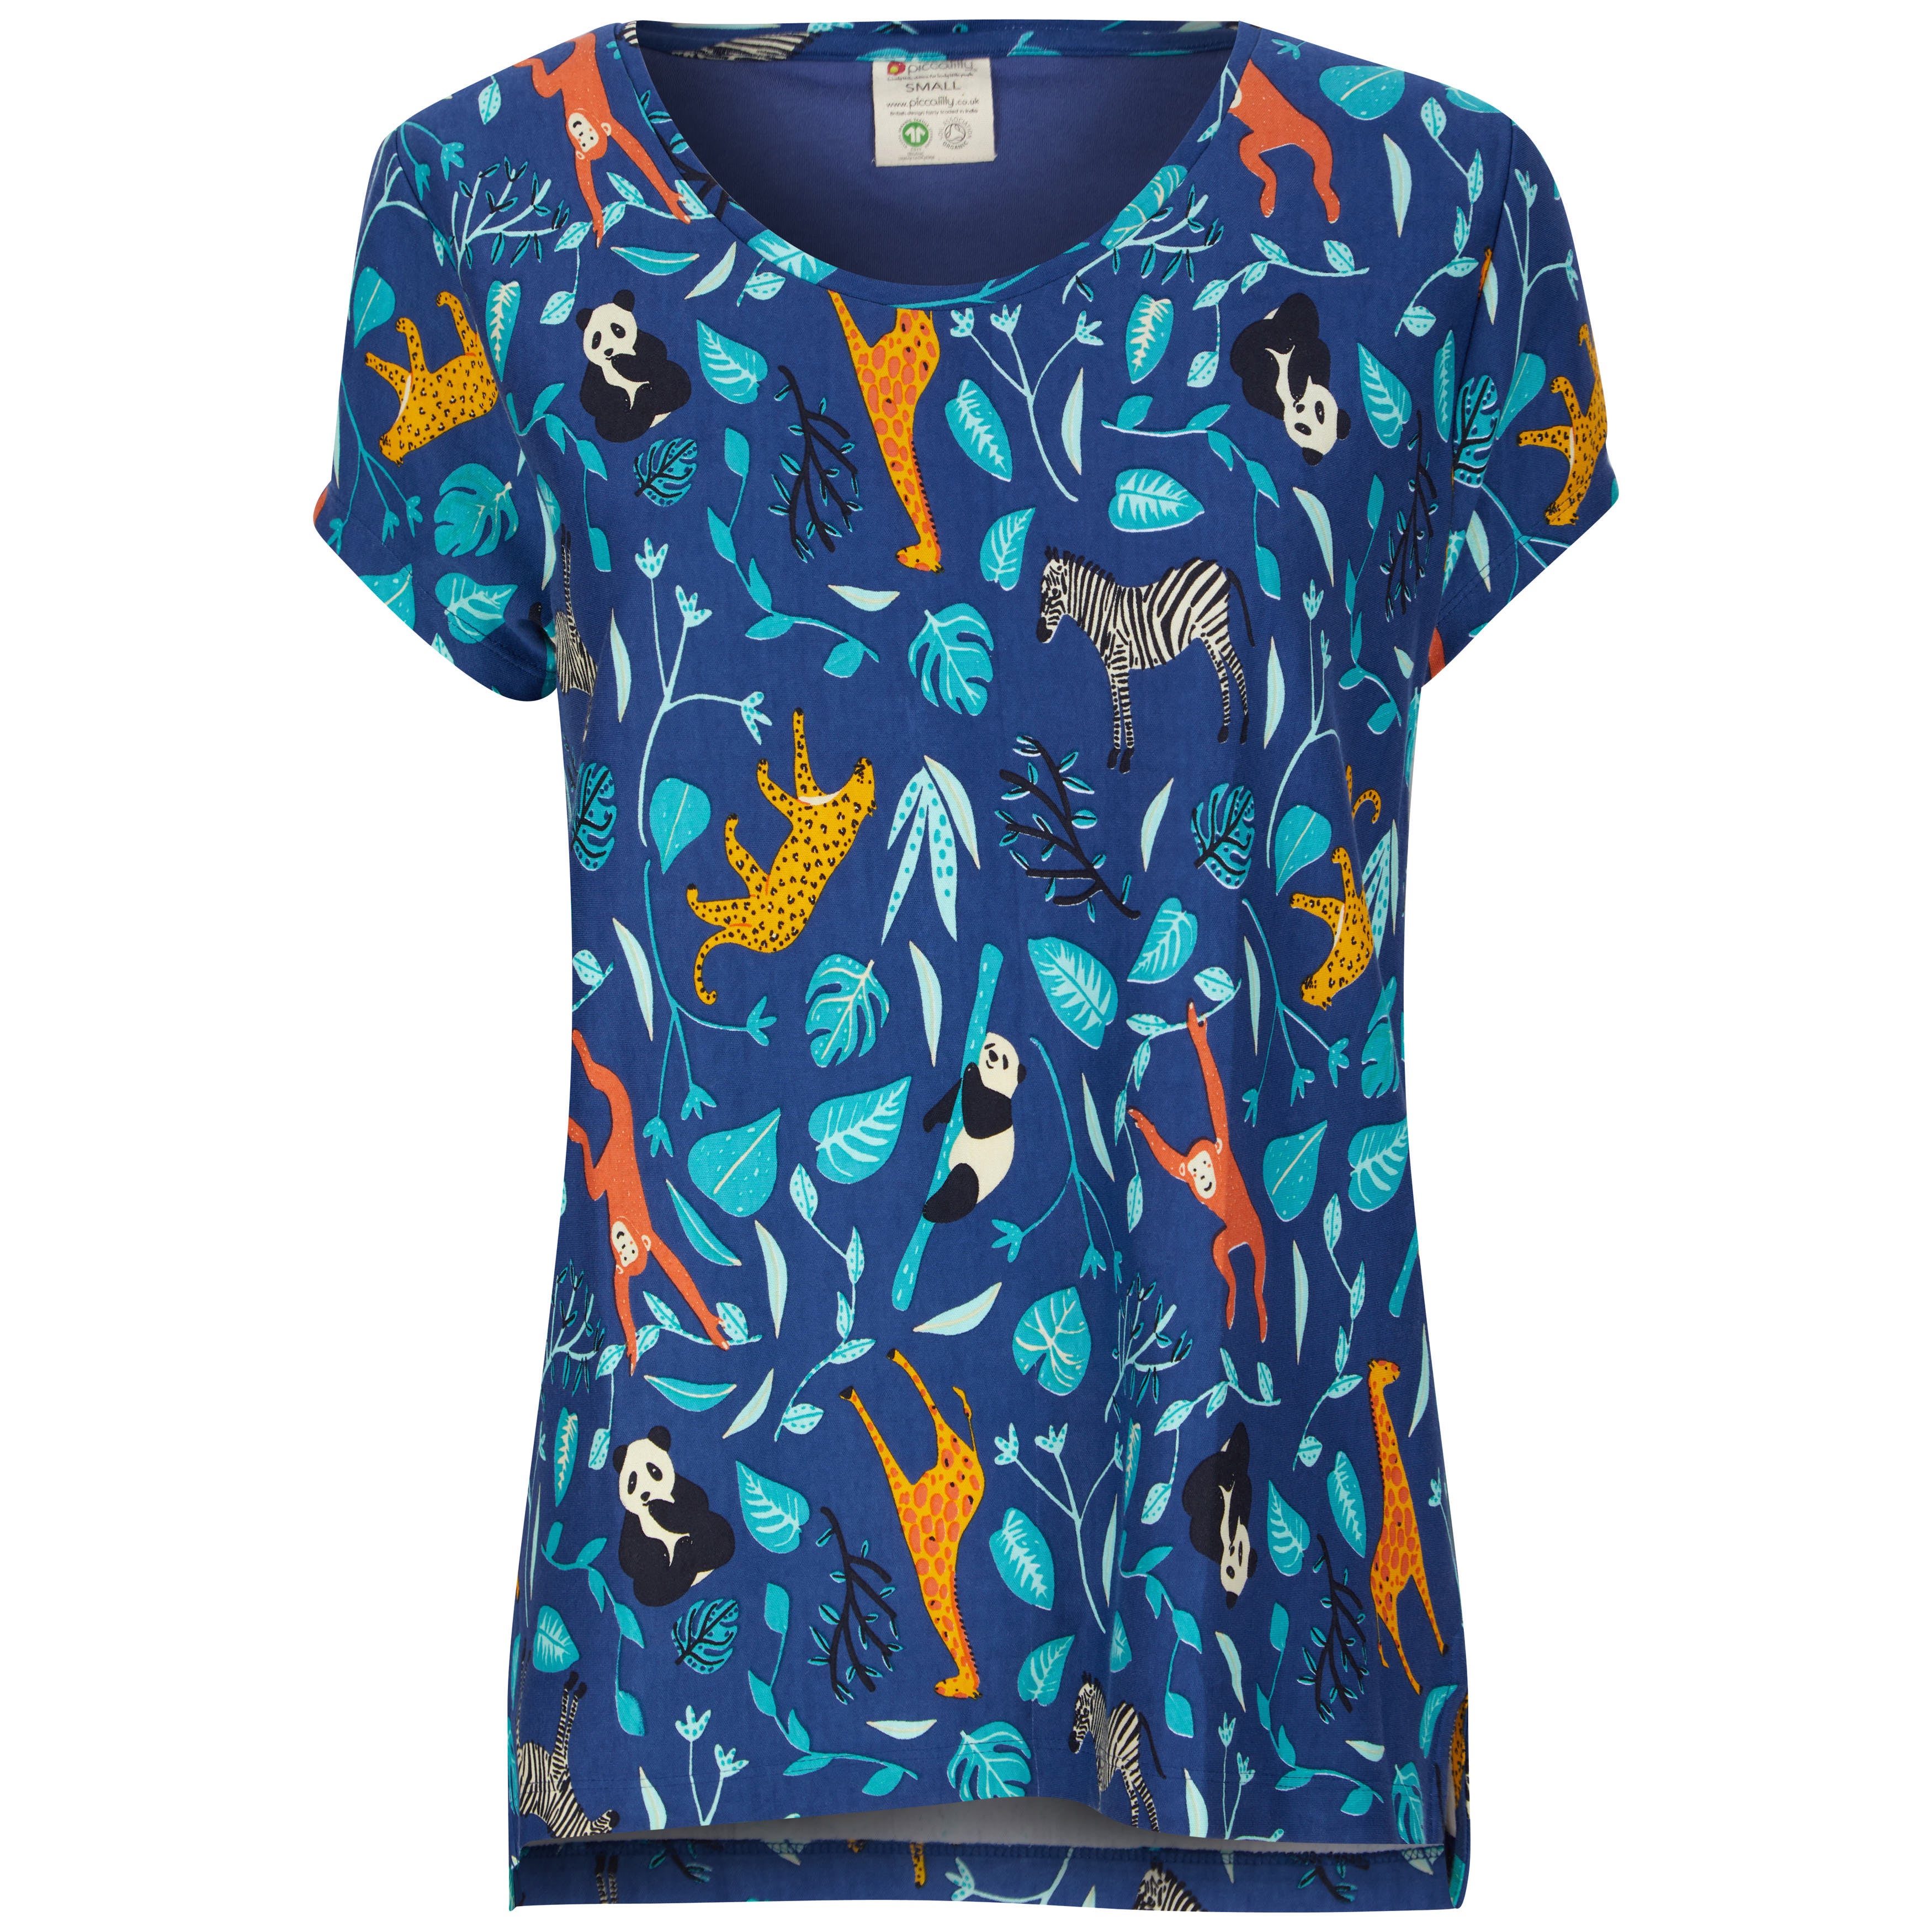 Piccalilly T-shirt Wildlife (Adult)